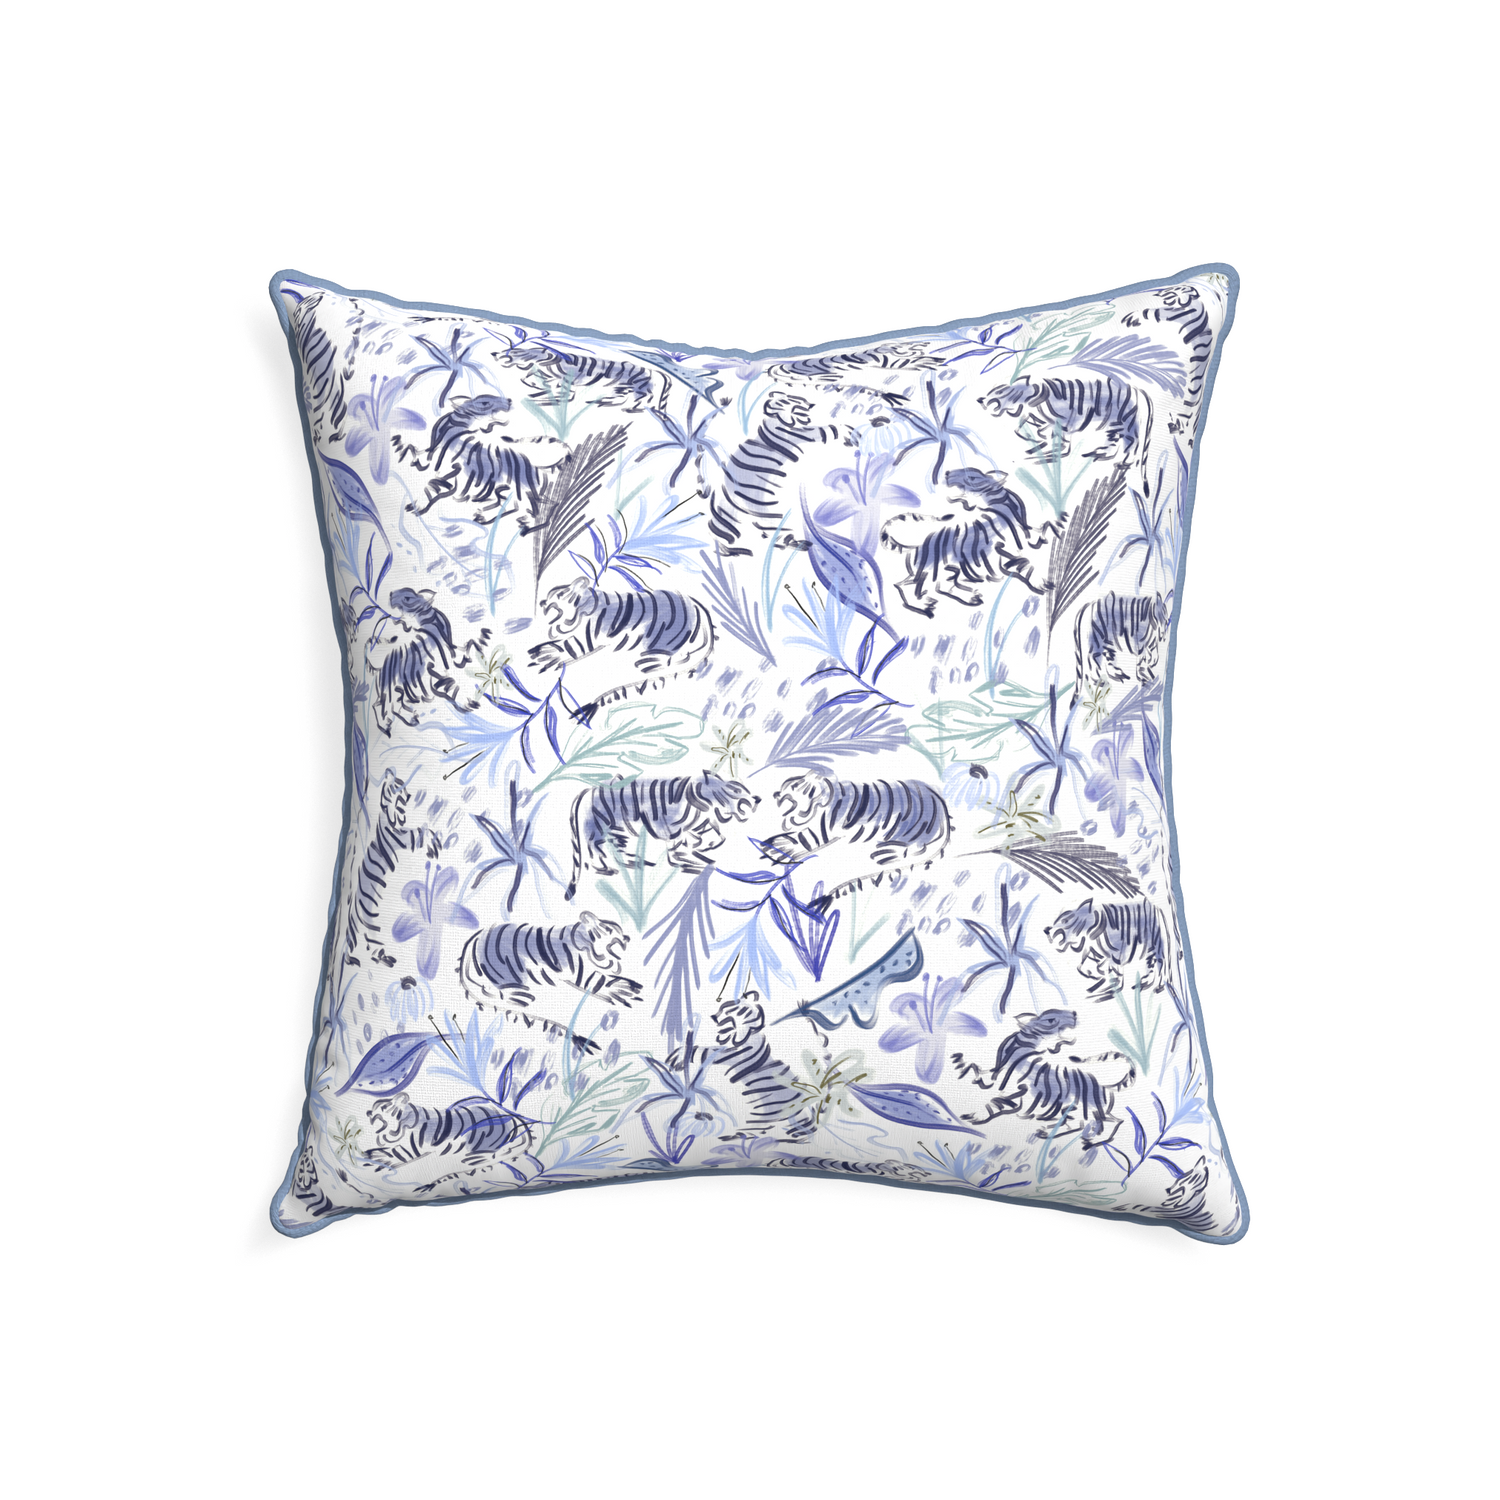 22-square frida blue custom blue with intricate tiger designpillow with sky piping on white background